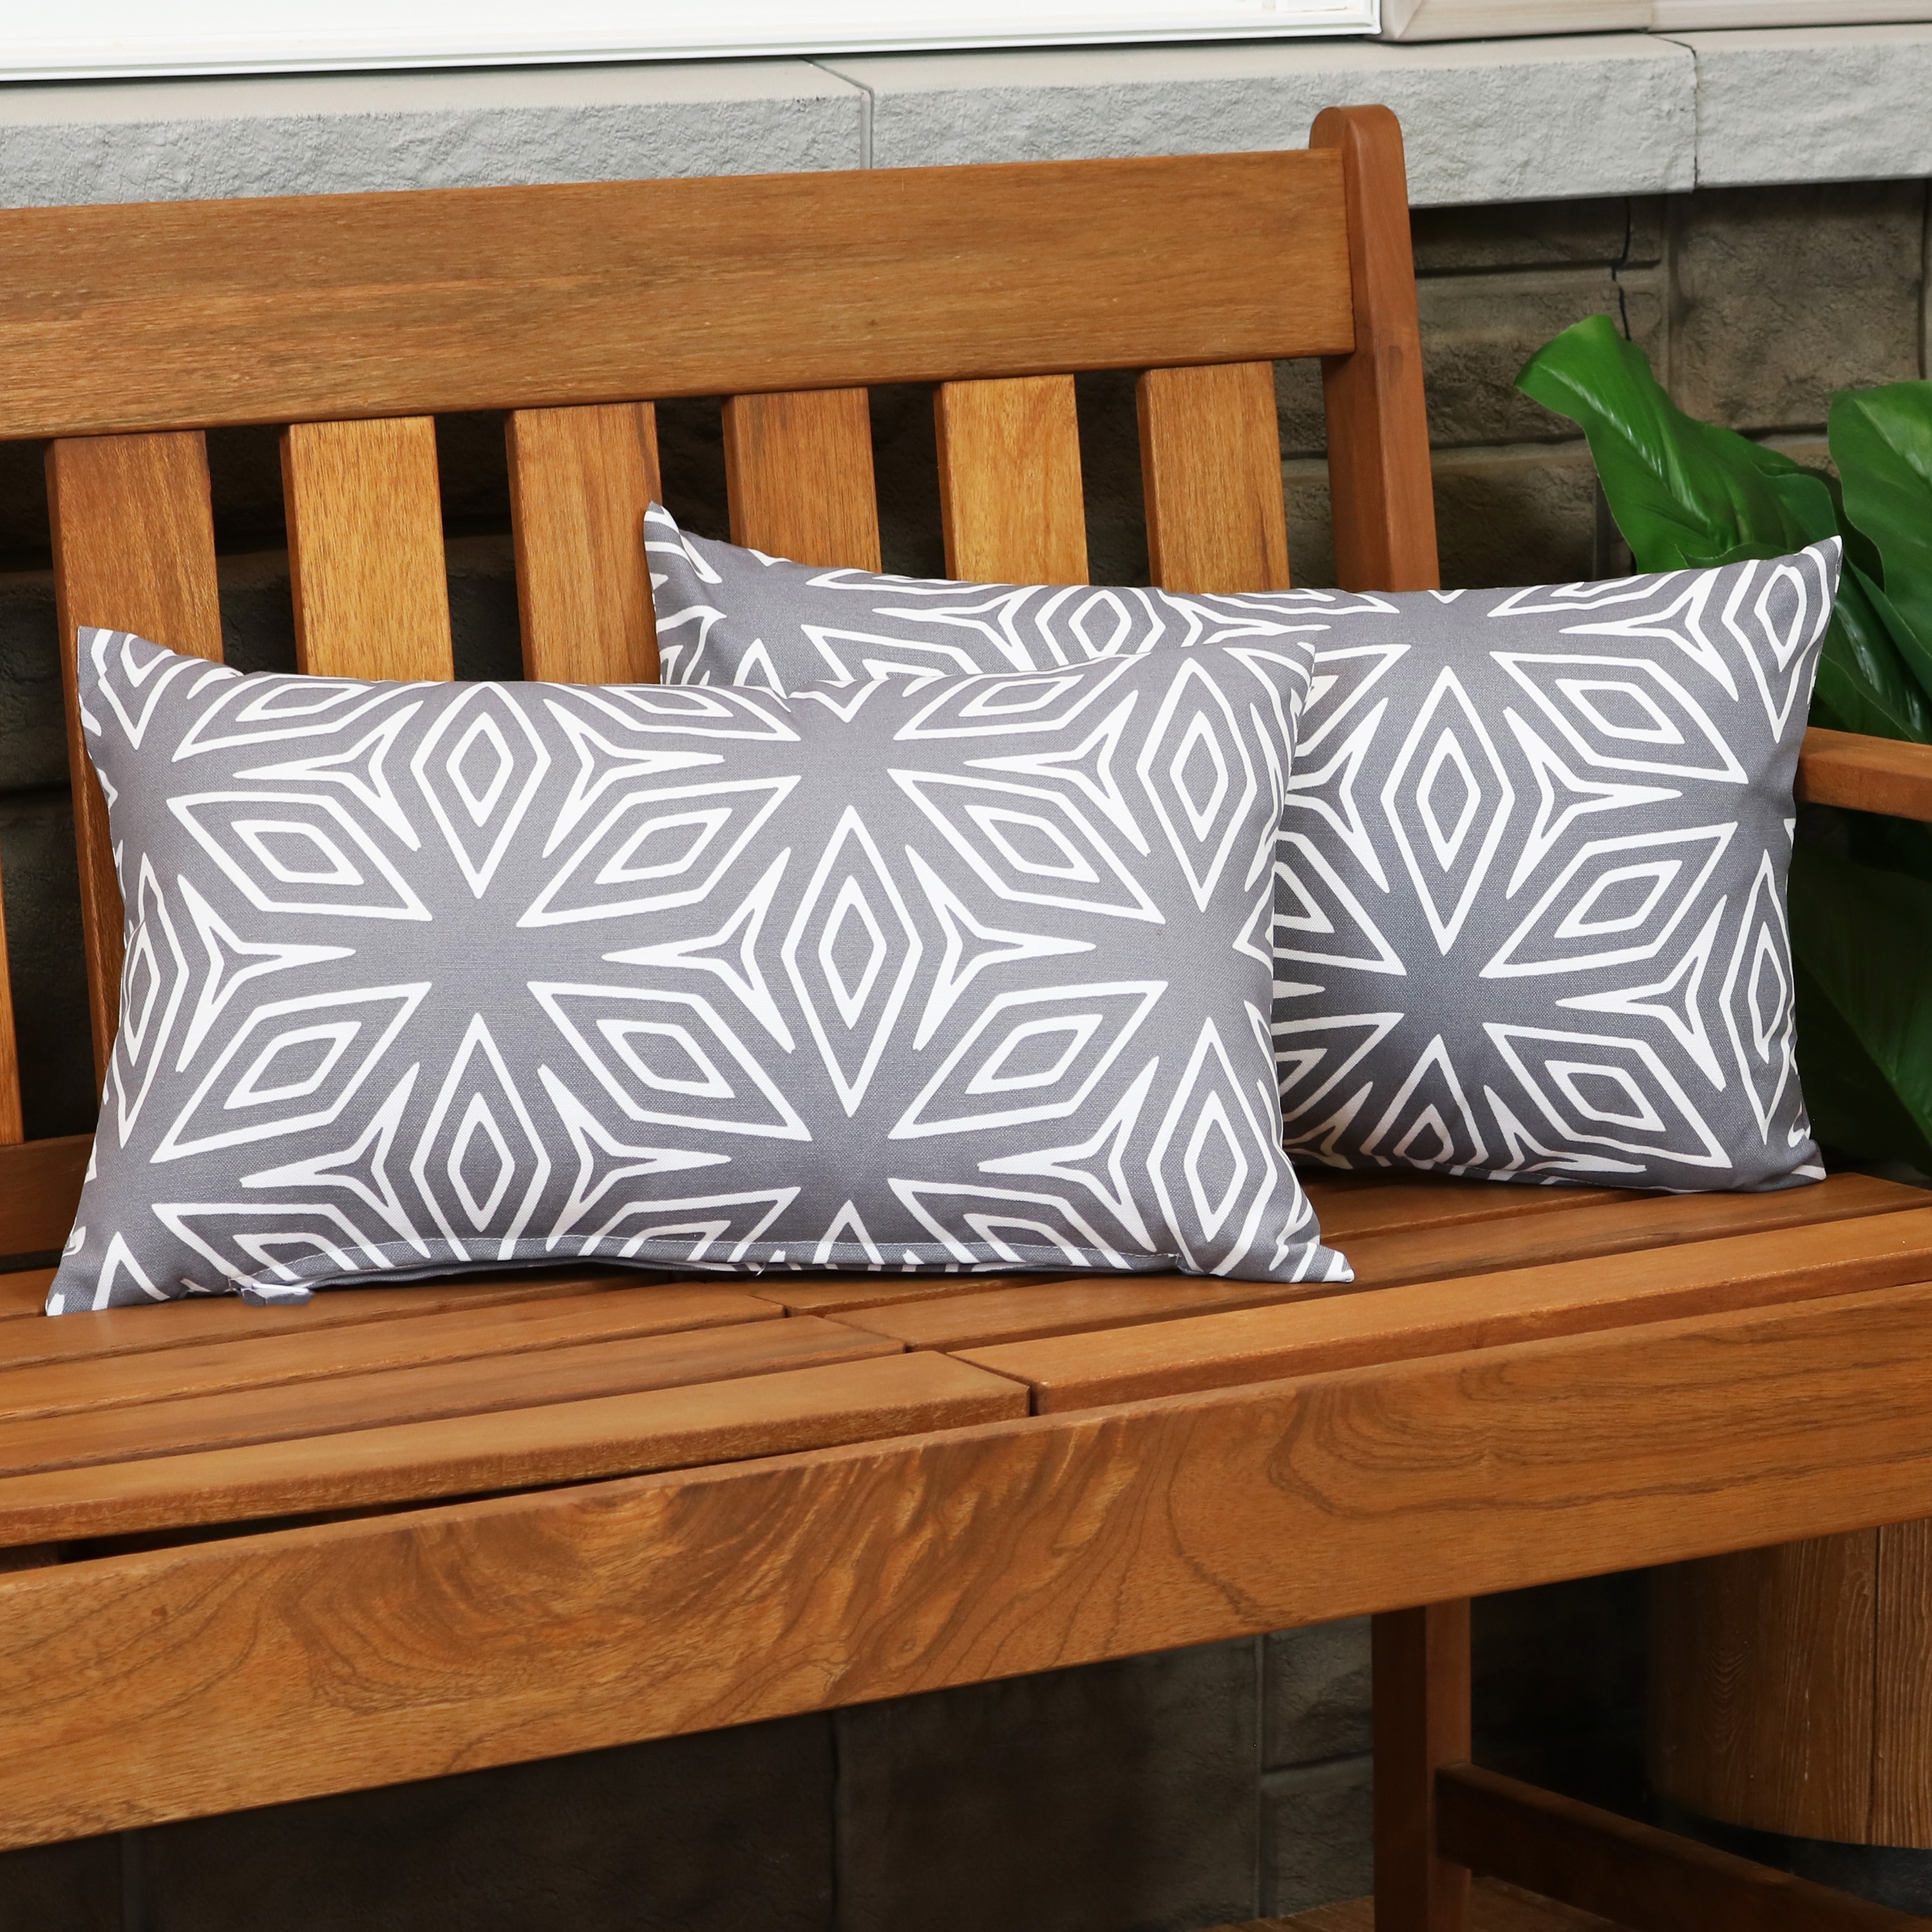 https://ak1.ostkcdn.com/images/products/is/images/direct/3940af17c632c7ad3ca6f8ba20c1fefc2a897983/Sunnydaze-2-Outdoor-Lumbar-Throw-Pillow-Covers---20-Inch.jpg